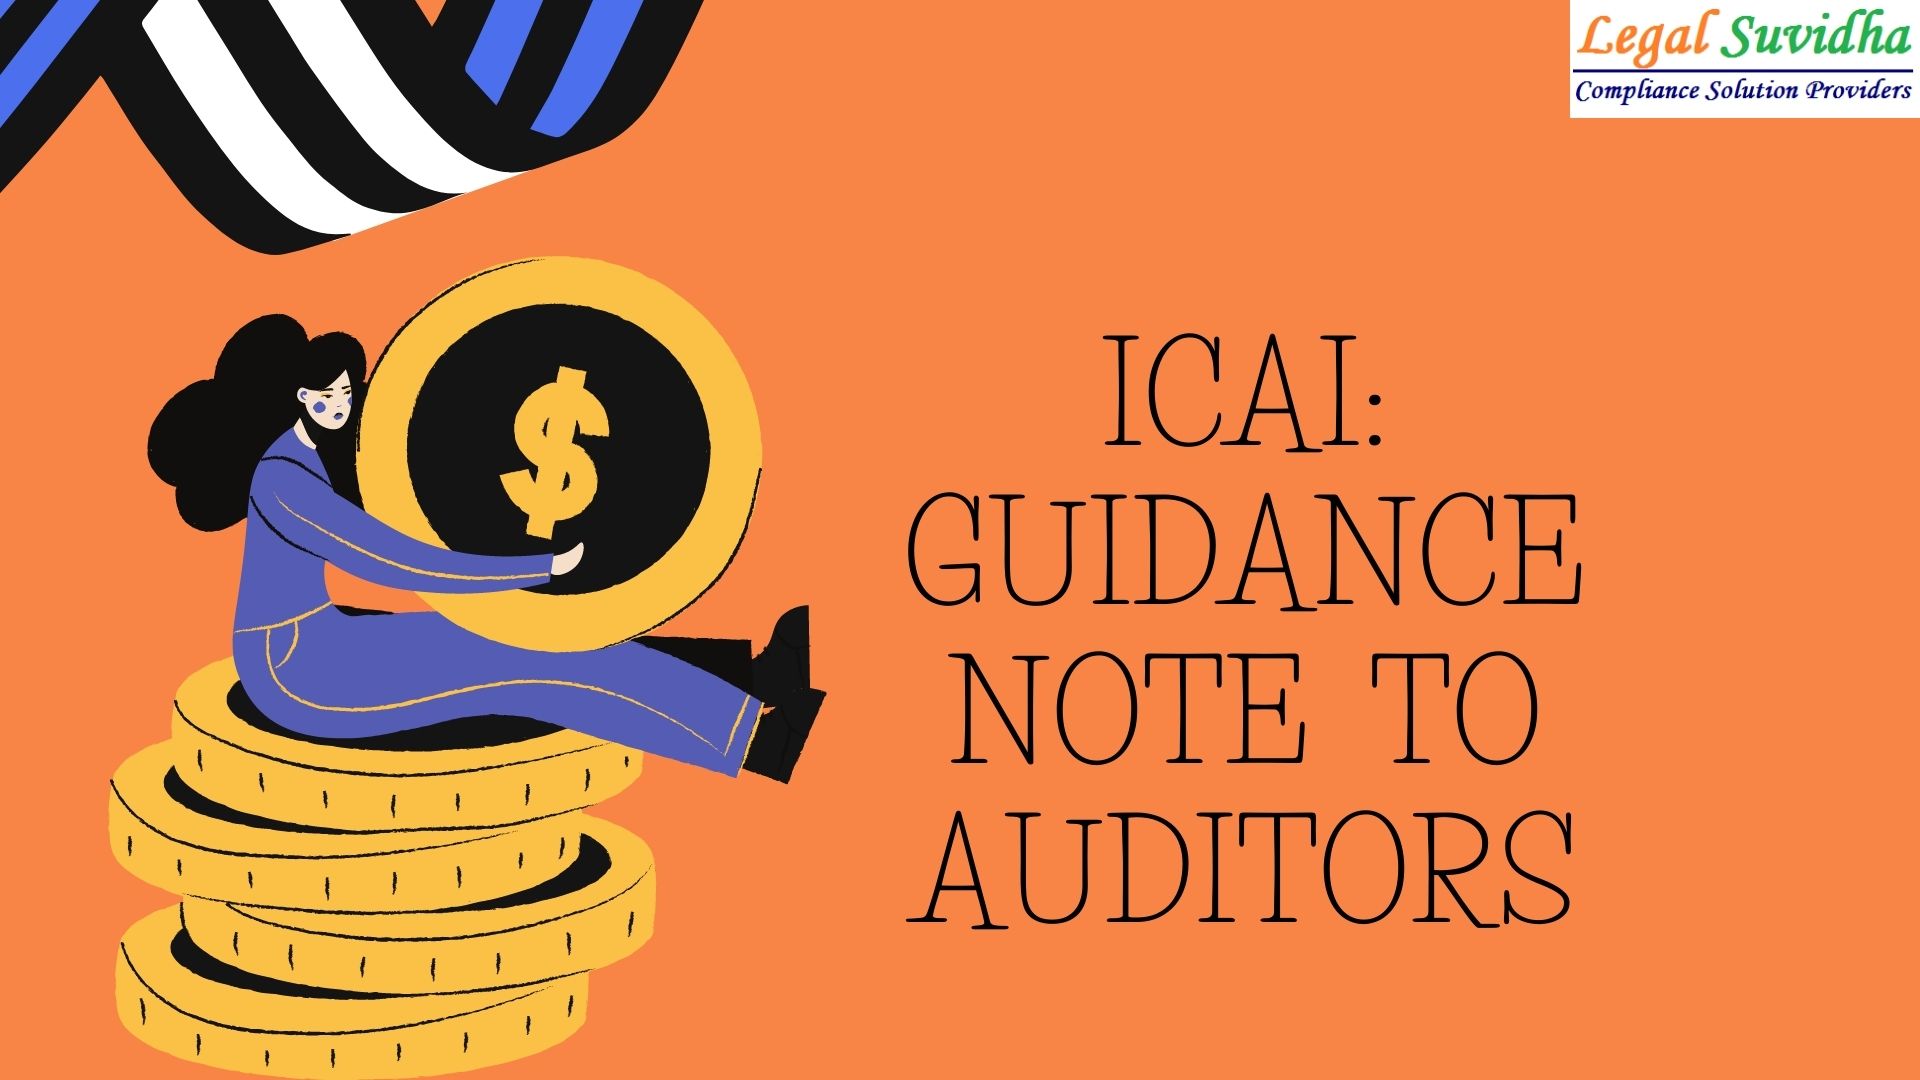 Guidance note to Auditors